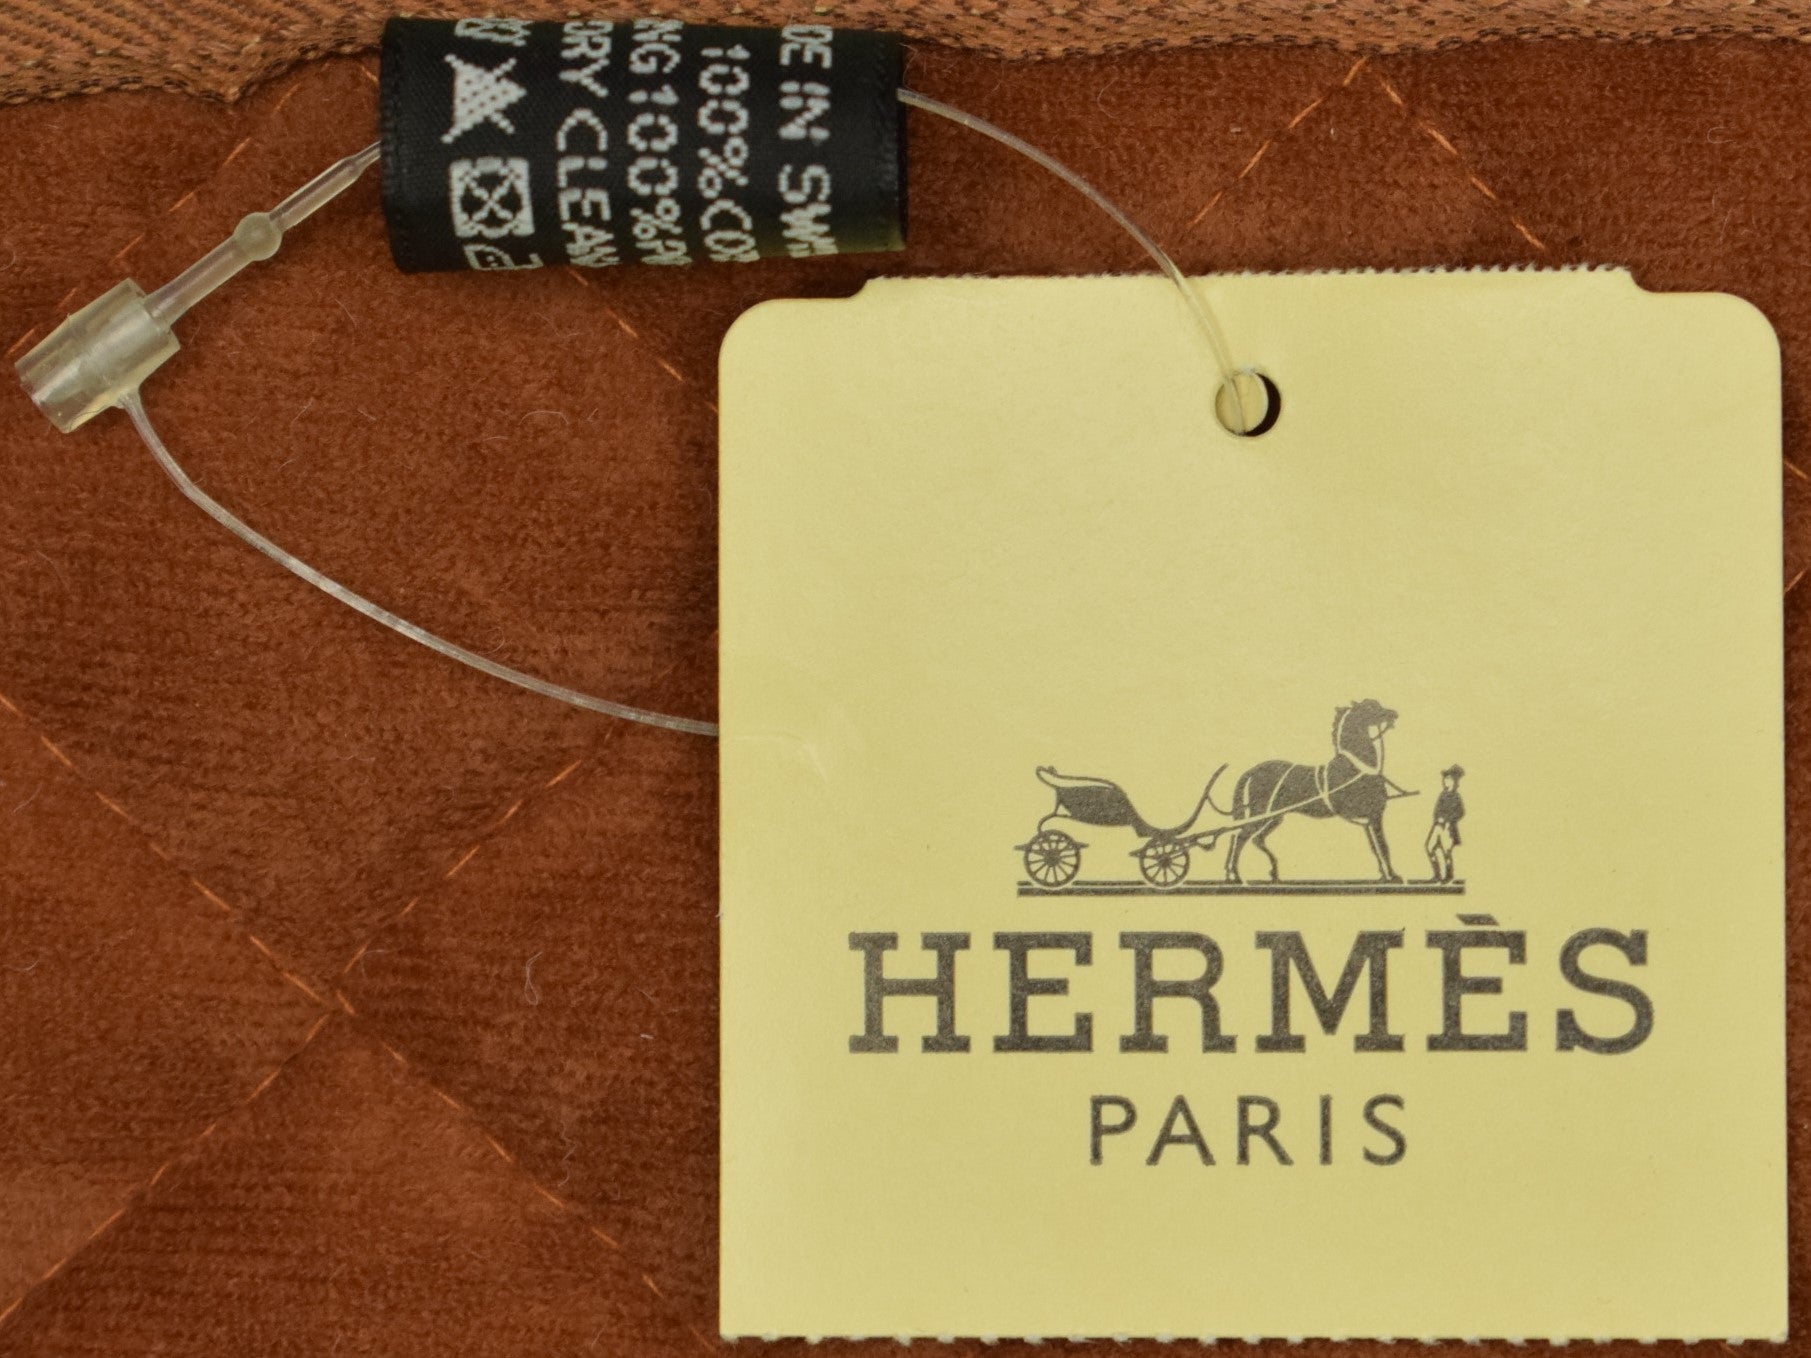 RARE FIND ALERT! #ConsignOfTheTimes currently has the Hermes Gold Shad